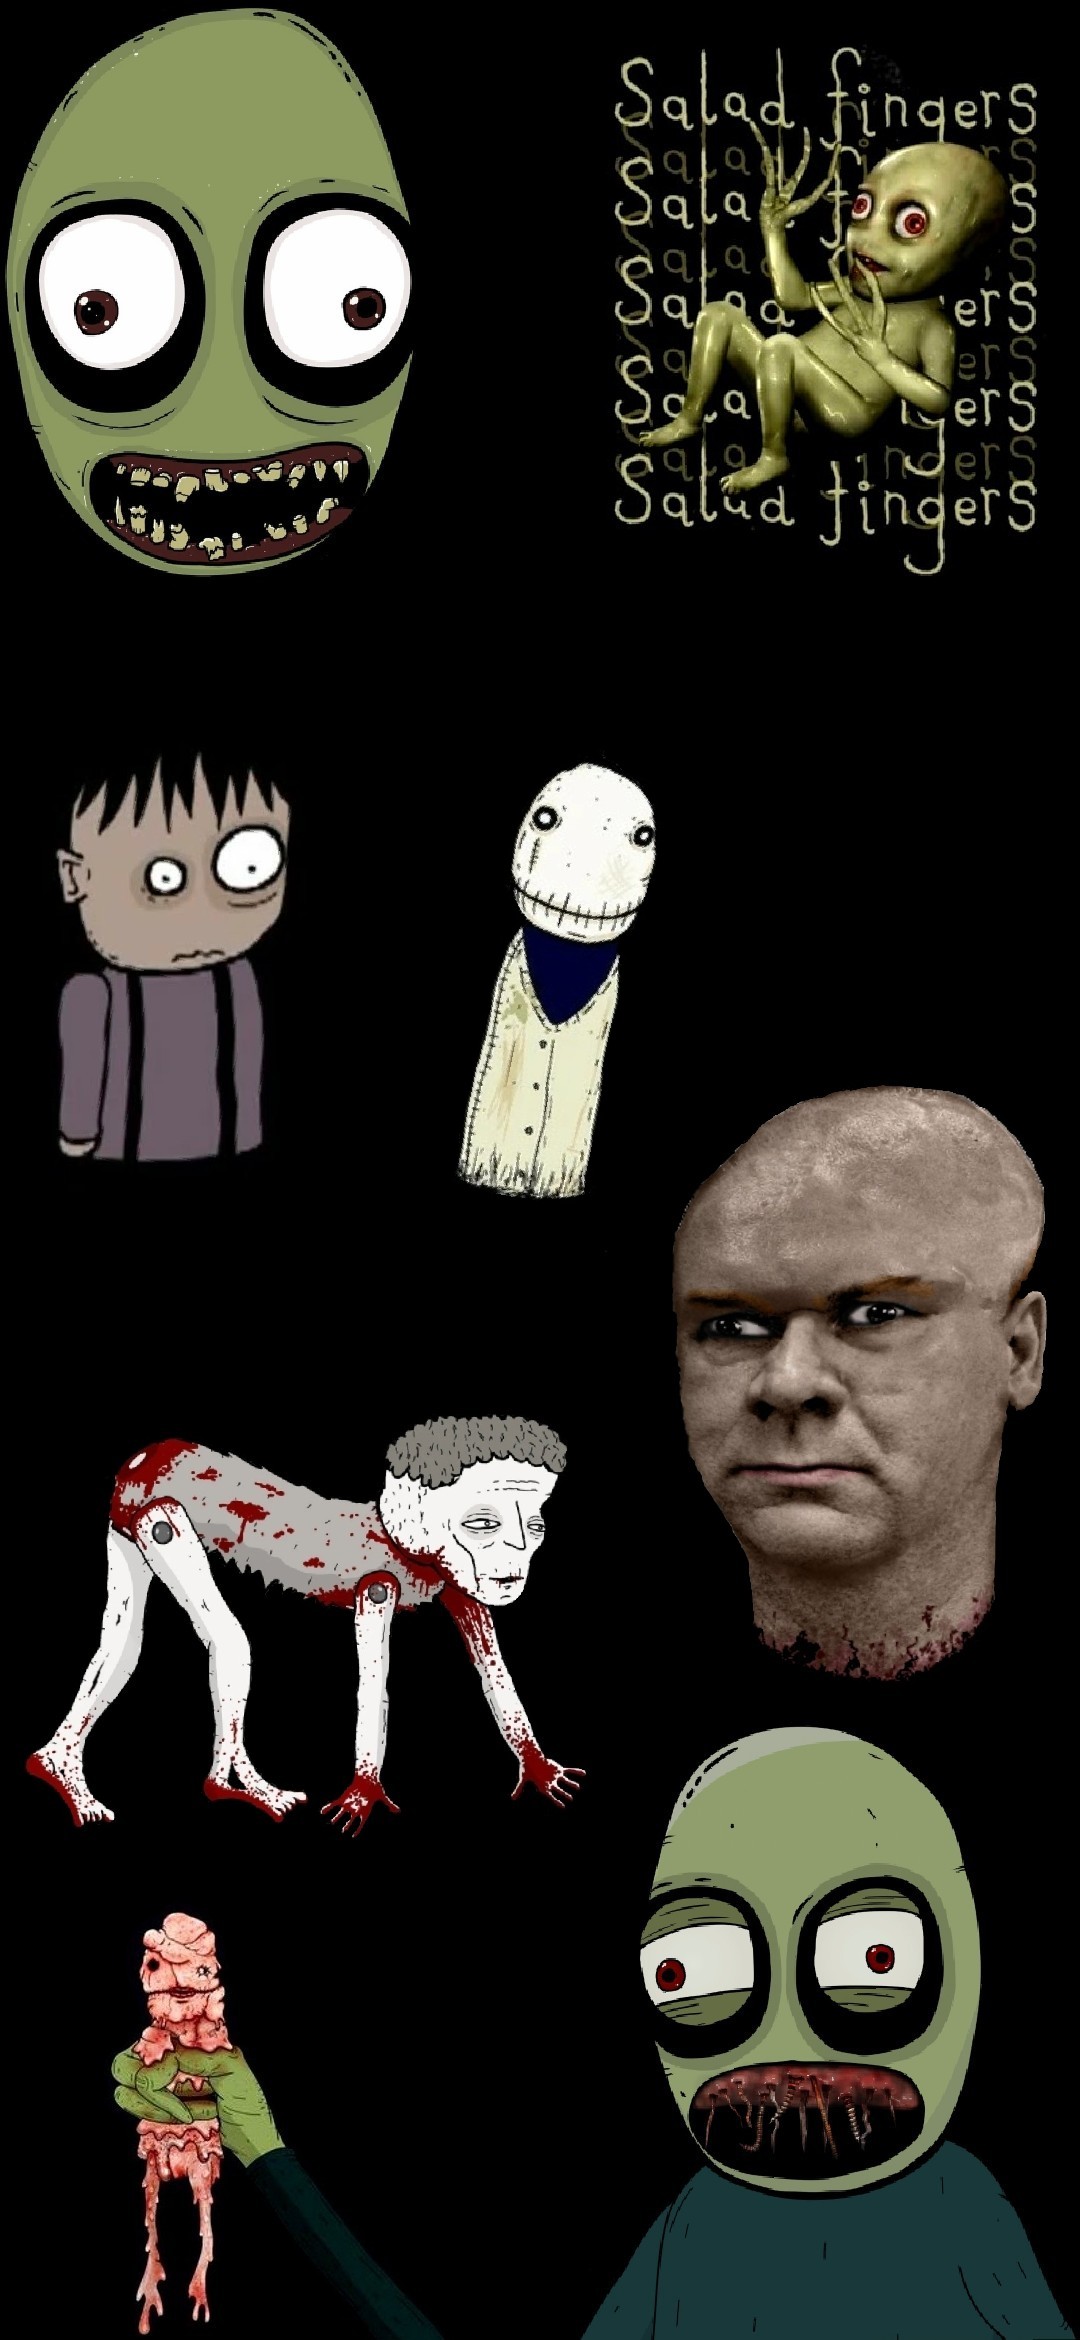 Custom Wallpaper Made Mostly From Salad Fingers Characters R